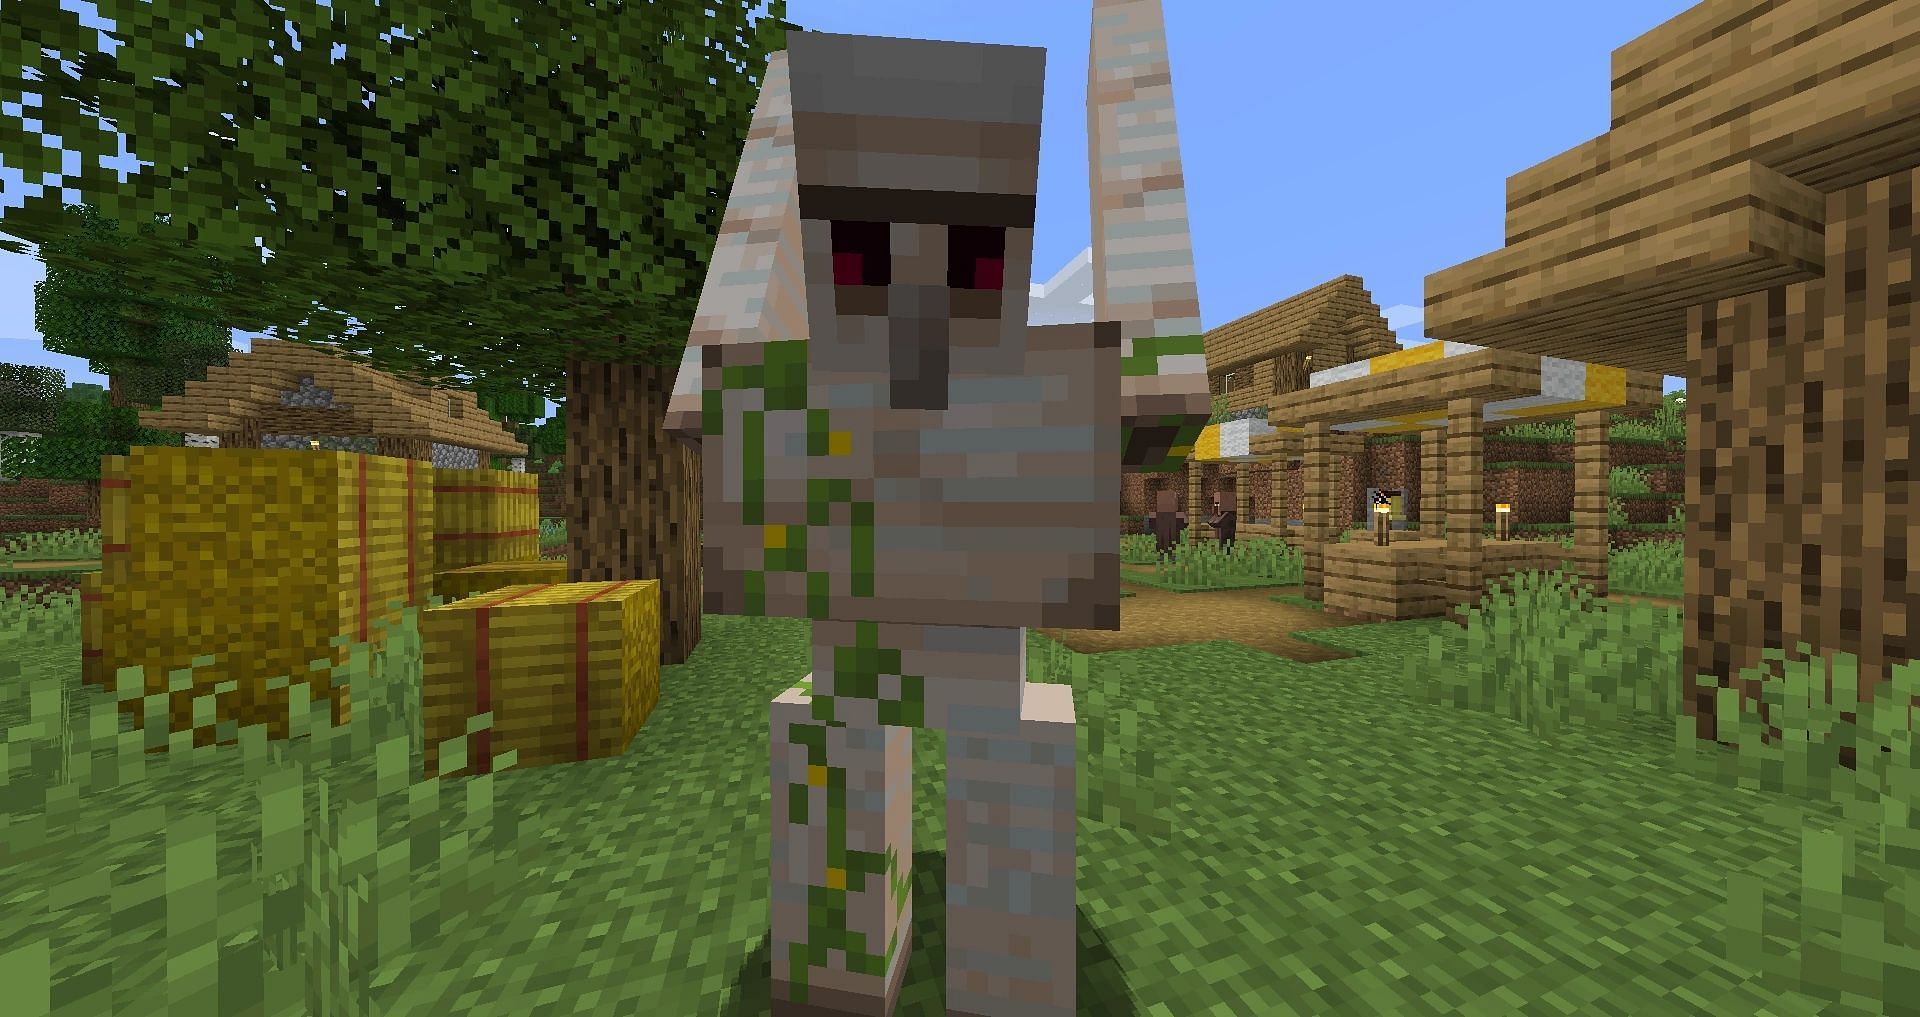 Players should not directly attack Iron Golems (Image via Minecraft Wiki)